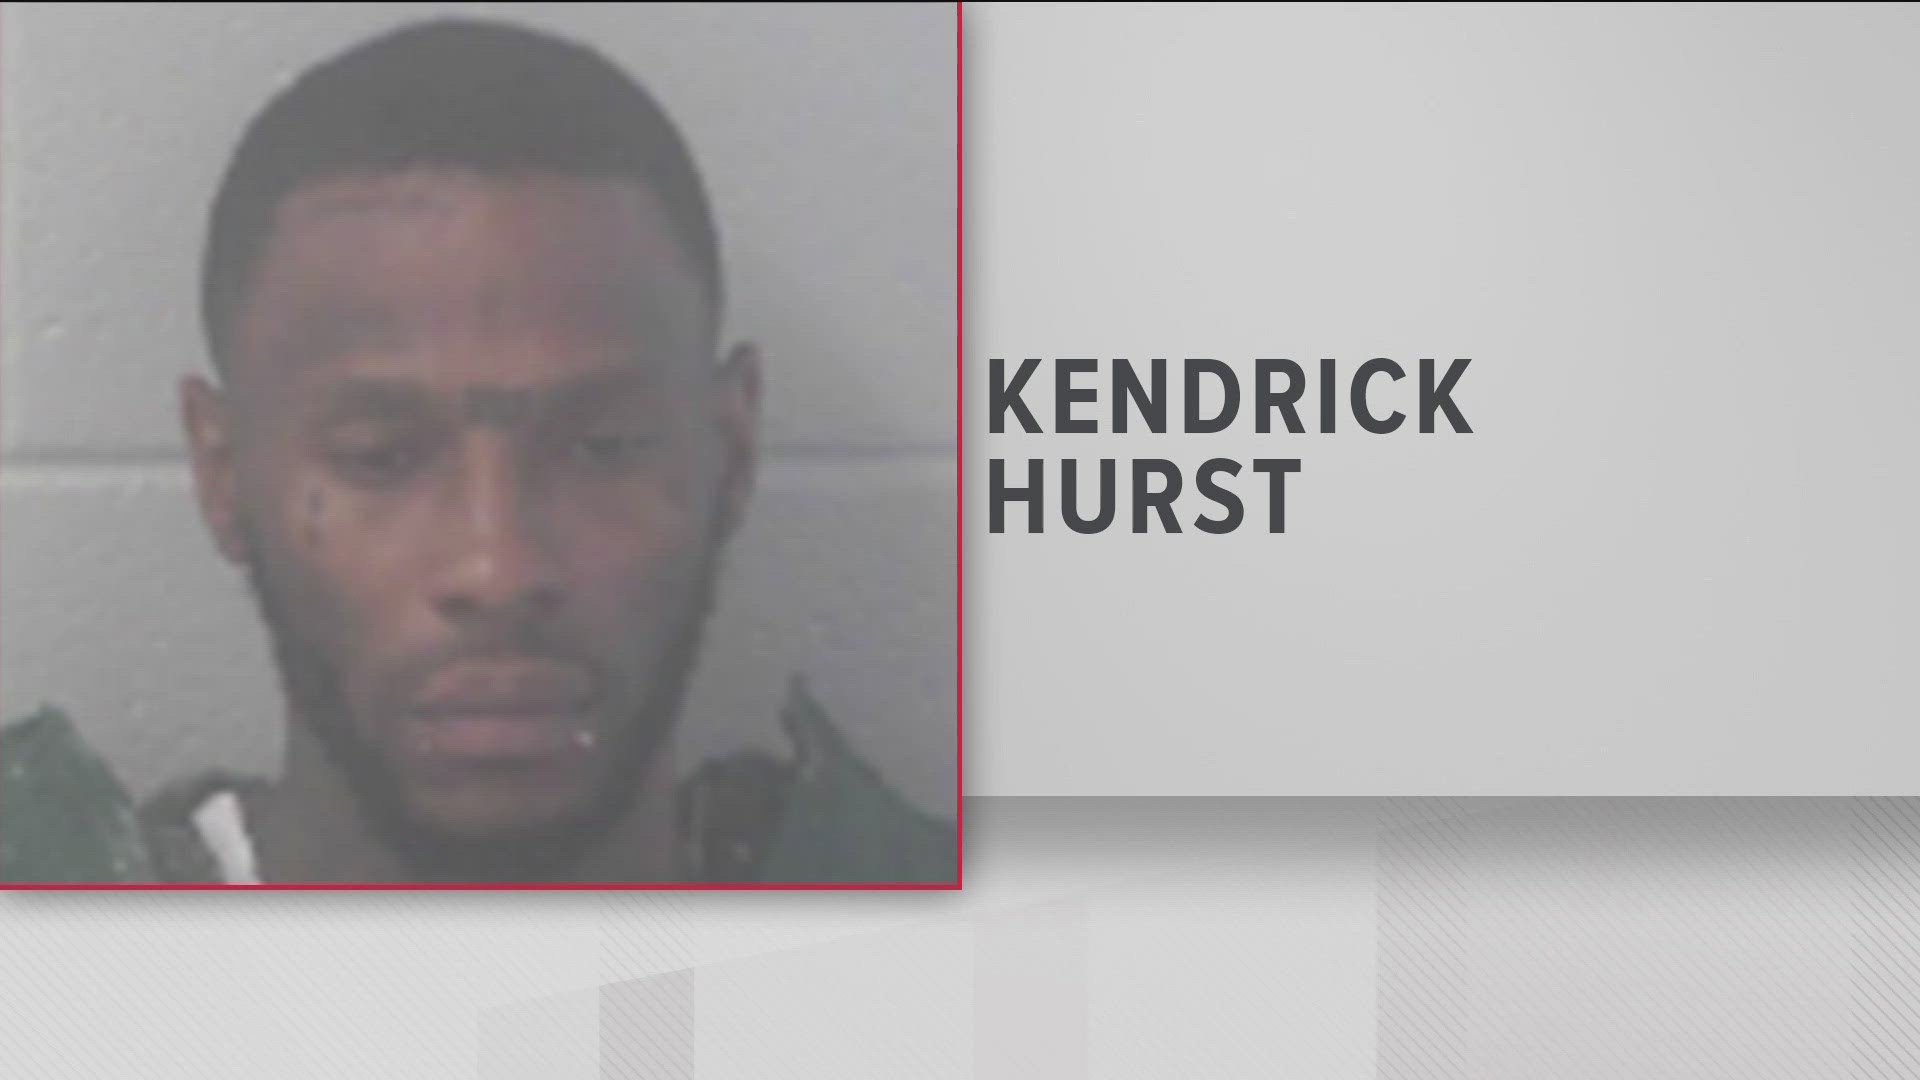 Authorities say 34-year-old Kendrick Hurst has been on the run since Saturday afternoon.